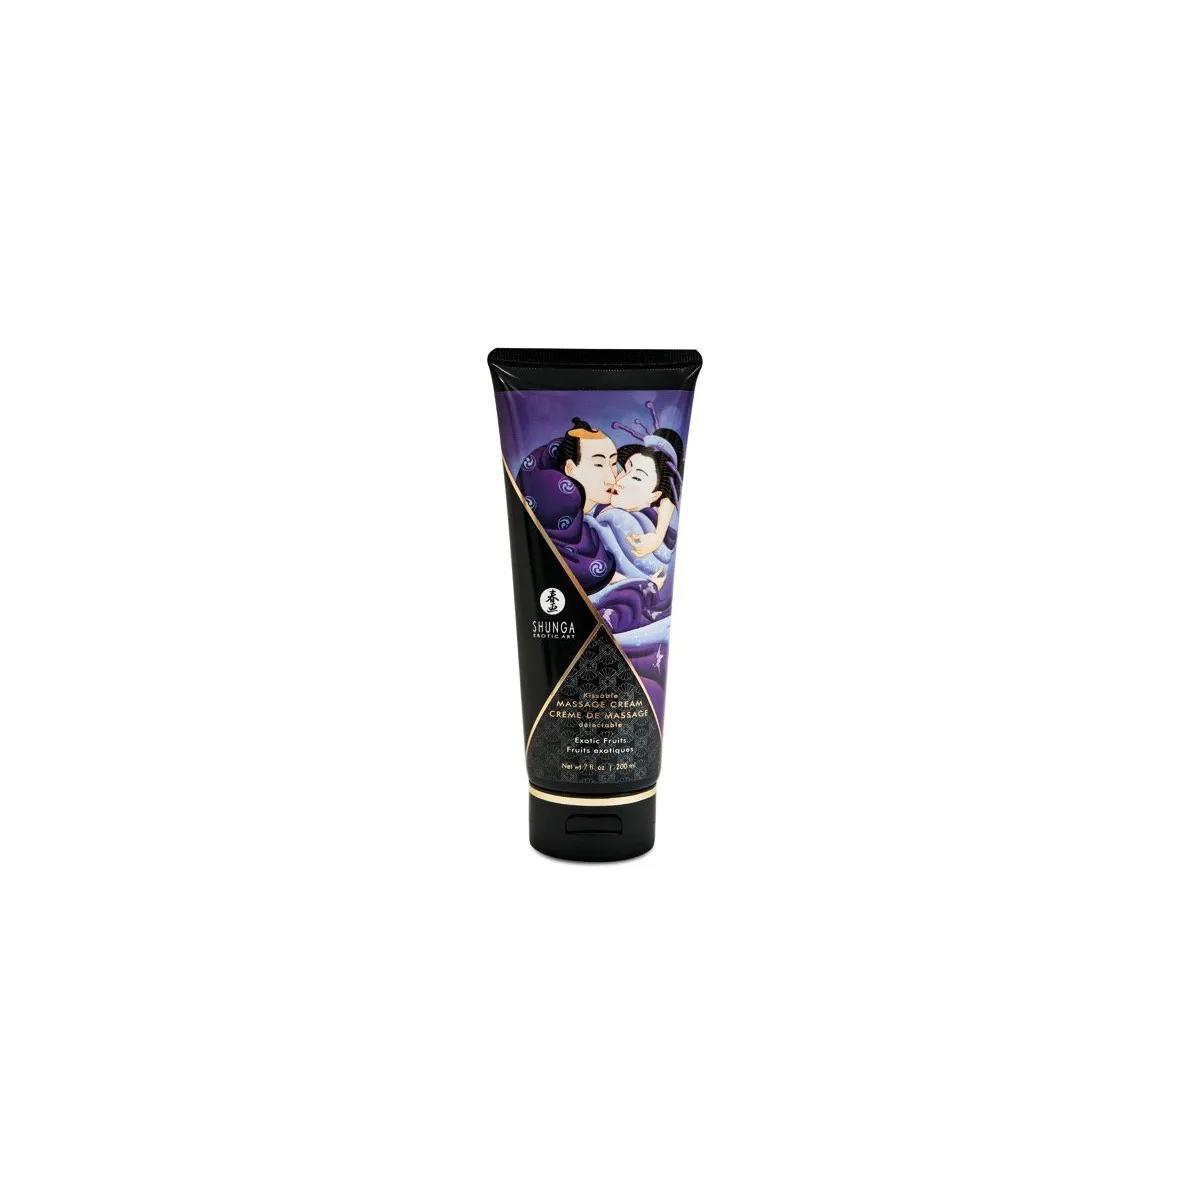 Delectable Massage Cream - Exotic Fruits